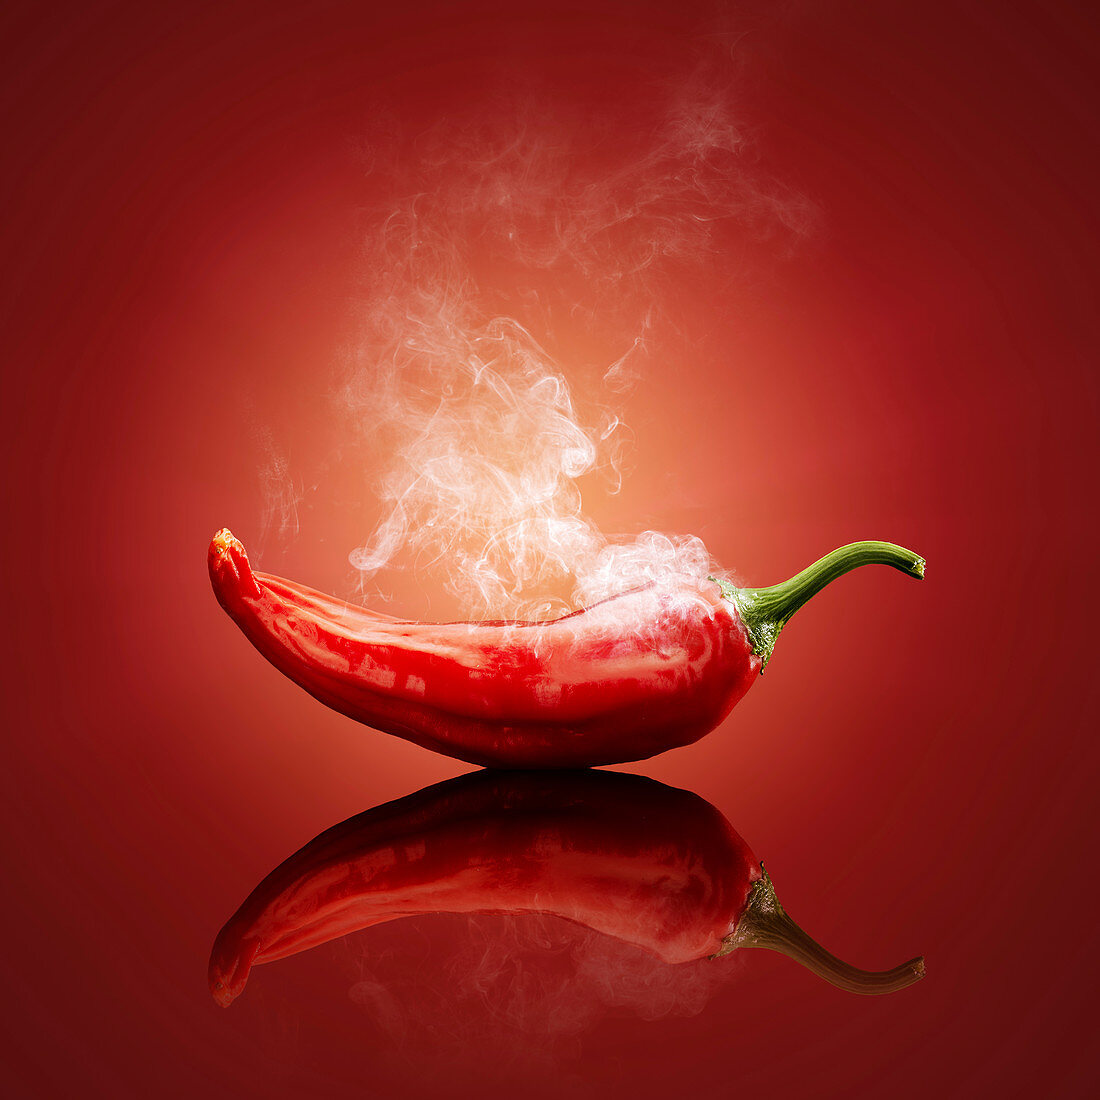 Red chilli with smoke against red background